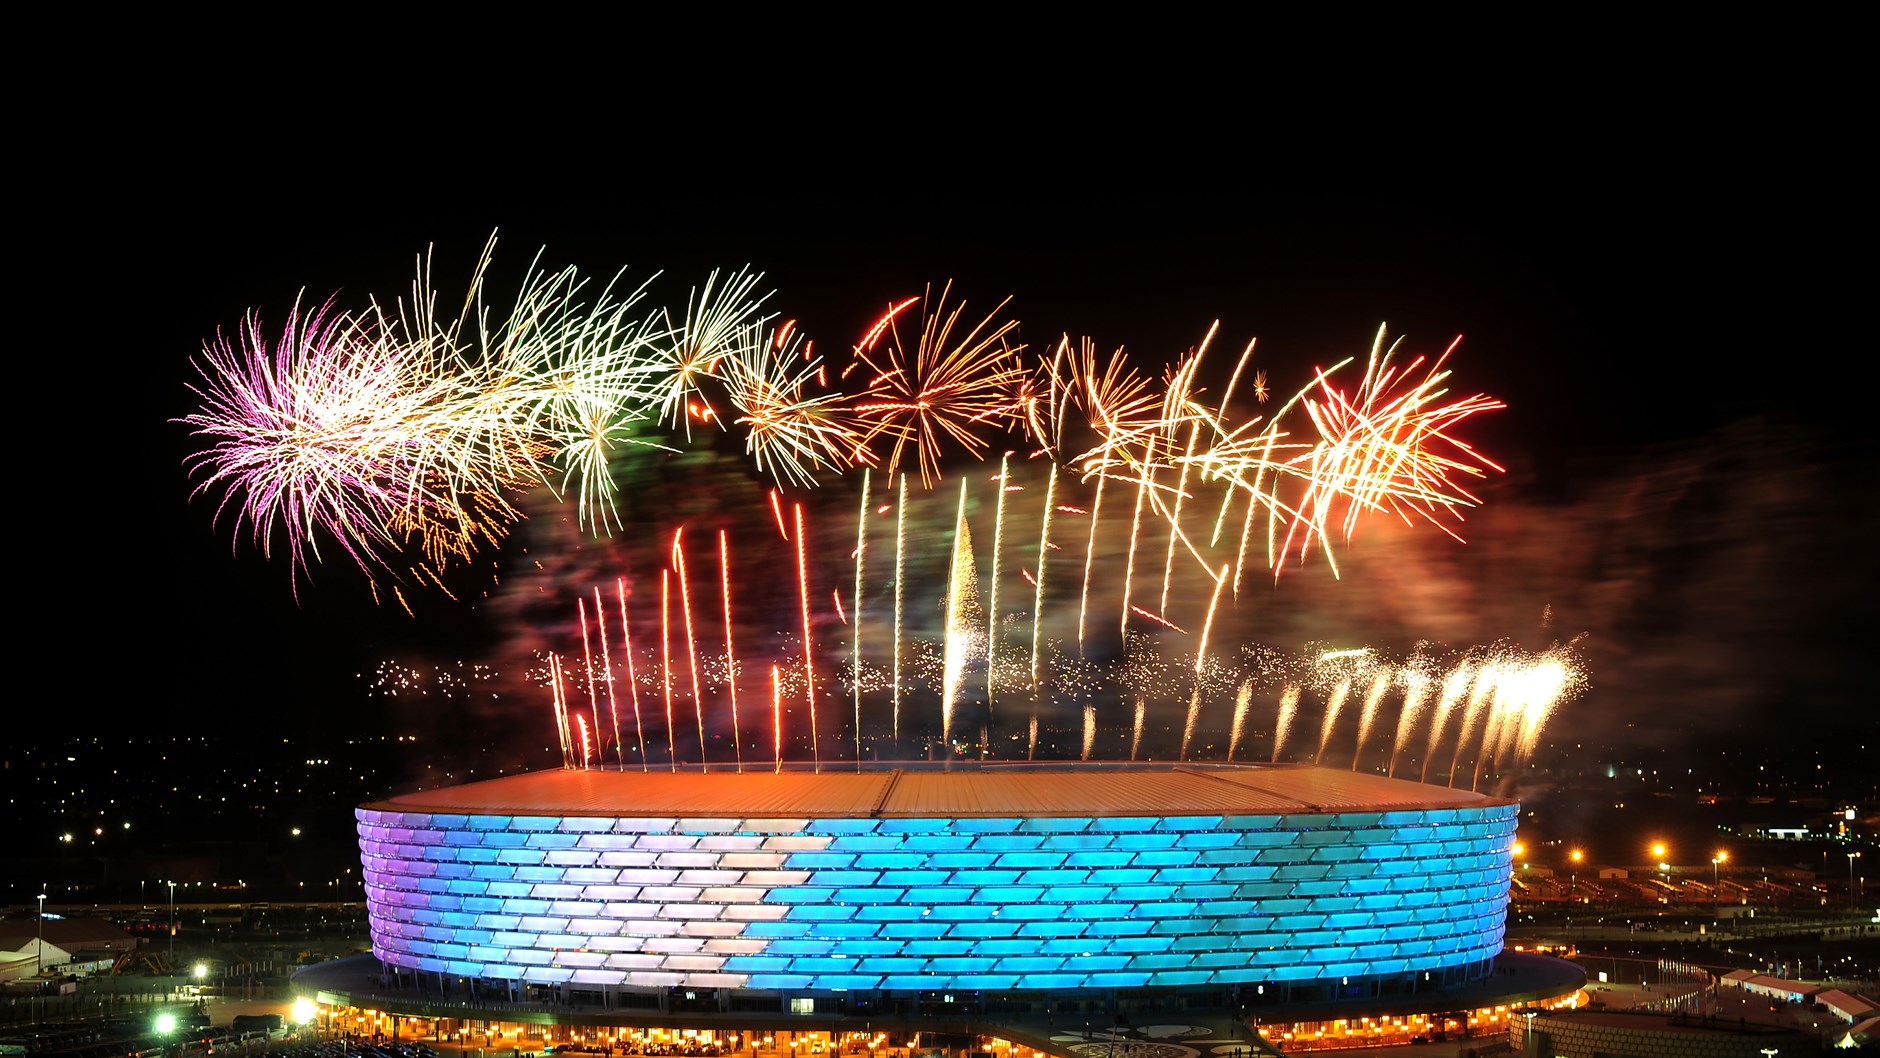 Over 420,000 tickets sold for Baku 2015